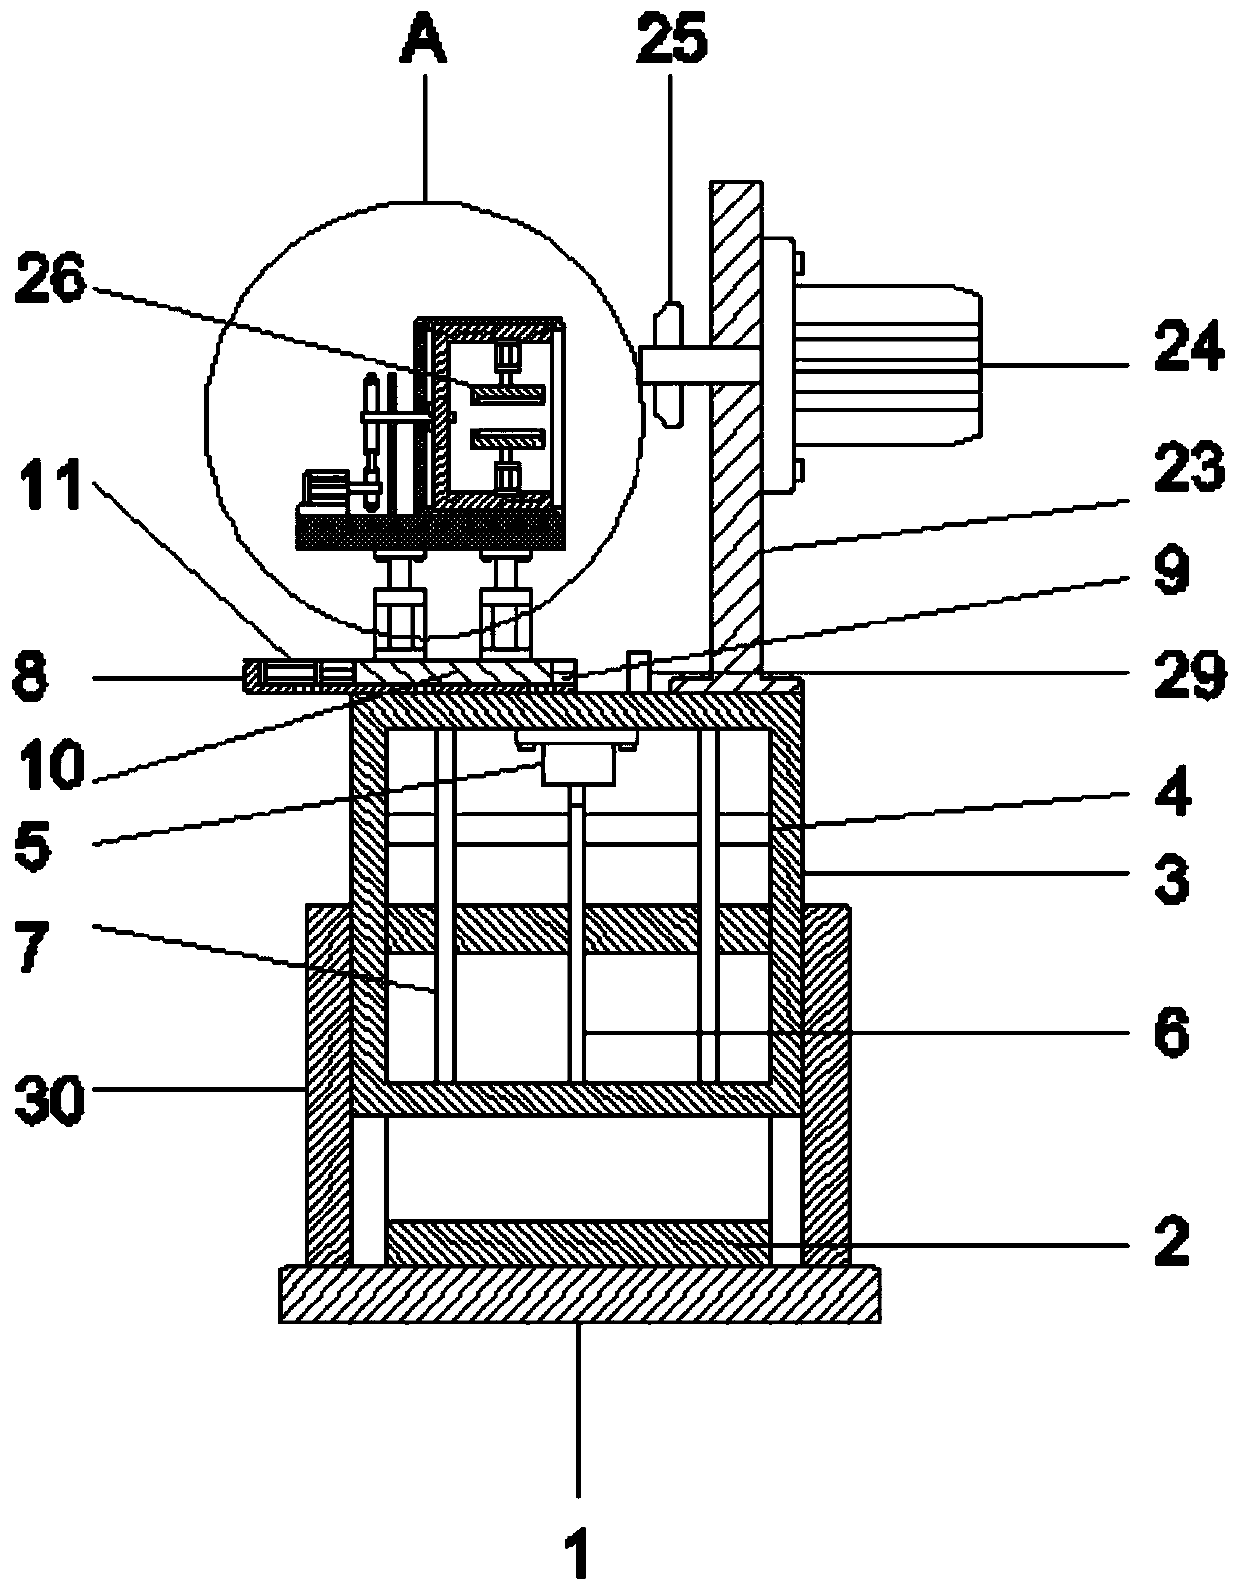 A carbon rod end chamfering device